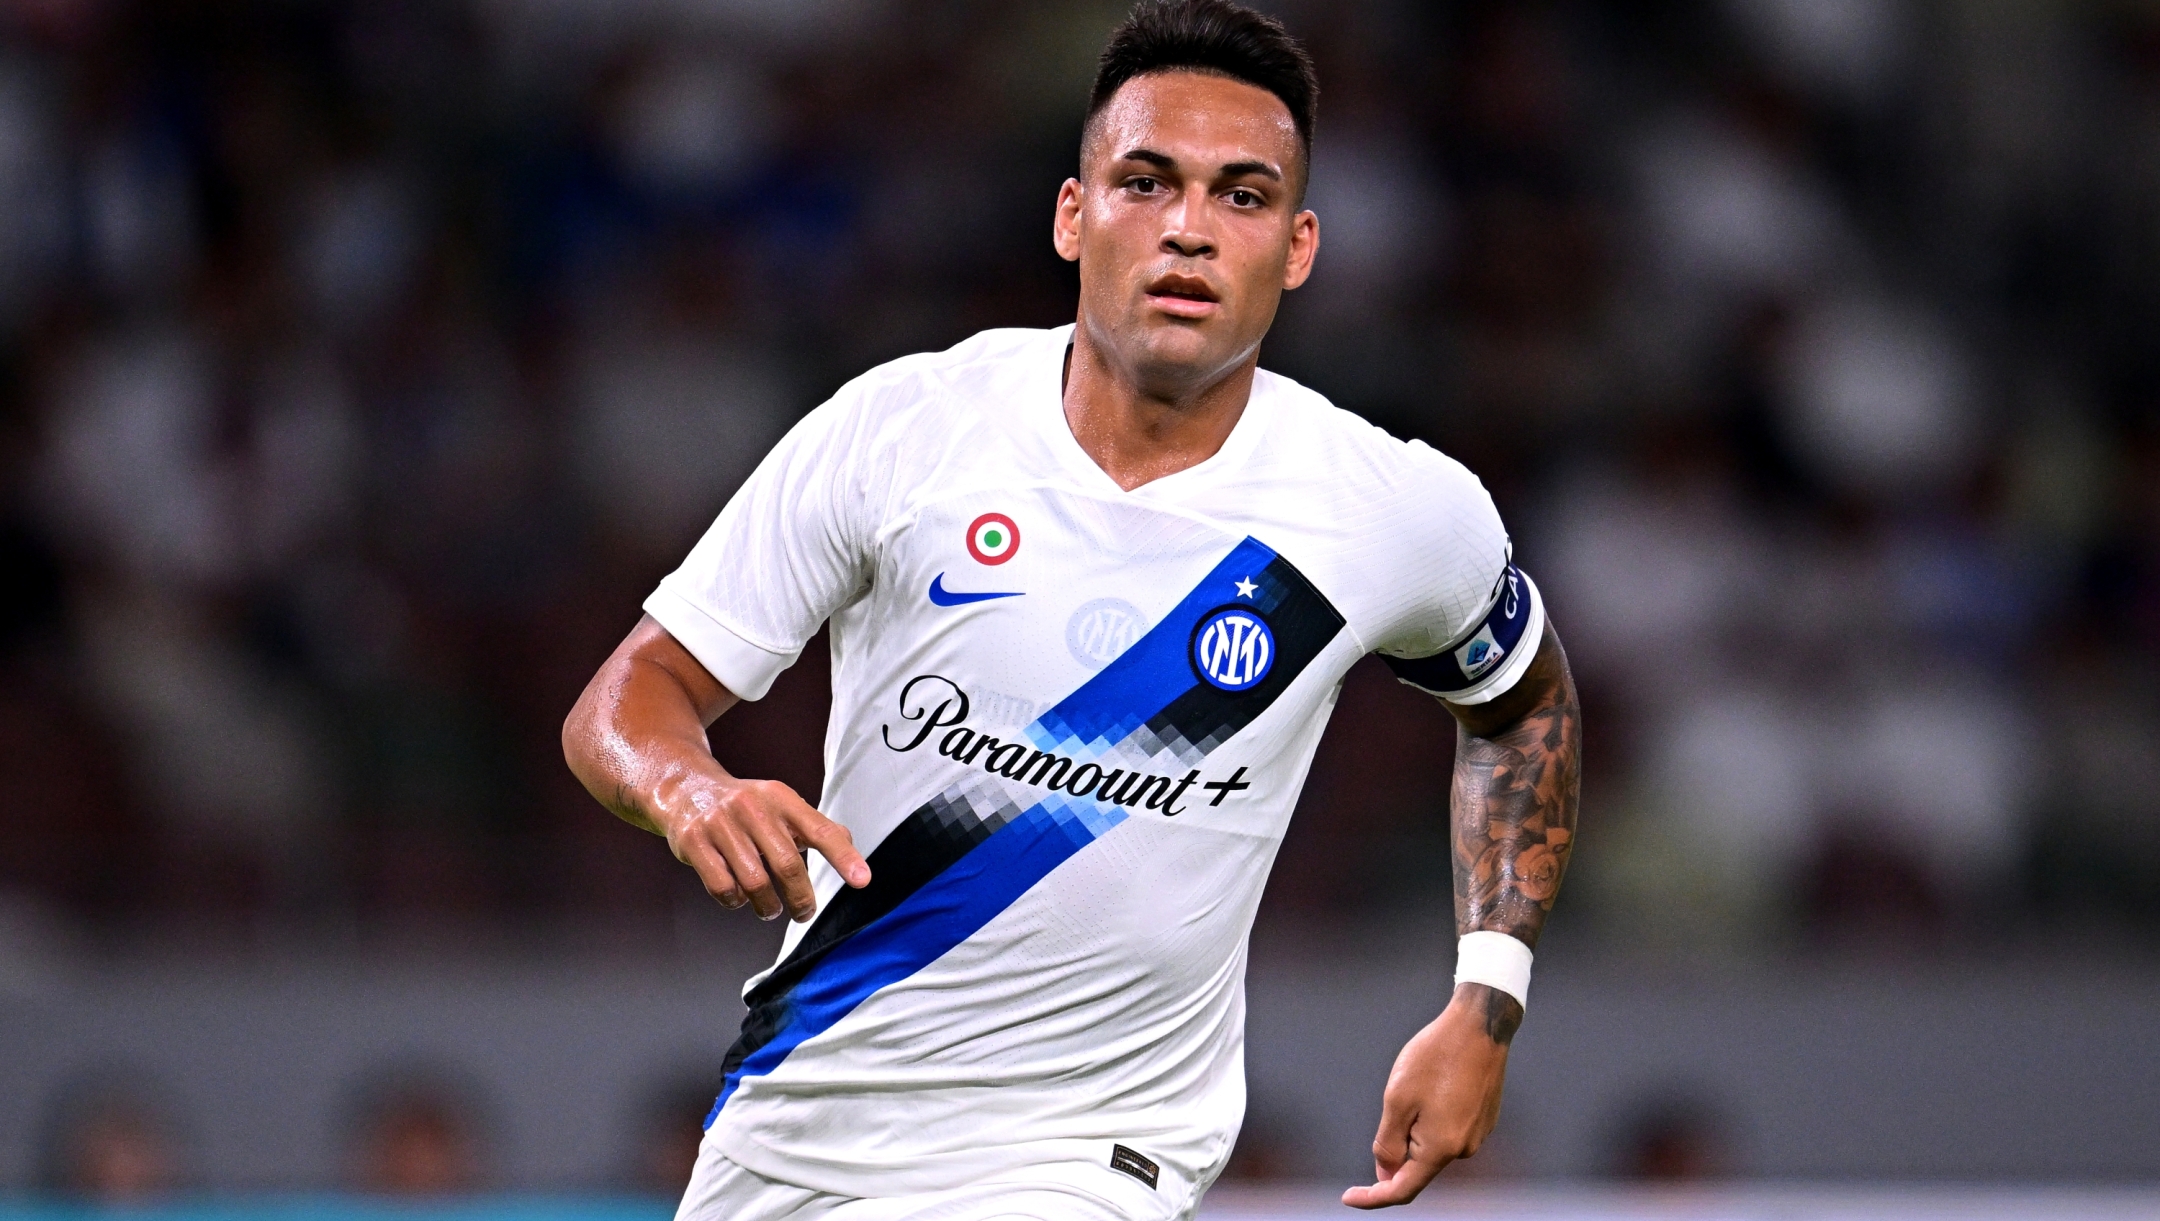 TOKYO, JAPAN - AUGUST 01: Lautaro Martinez of Inter during the pre-season friendly match between Paris Saint-Germain and FC Internazionale on August 01, 2023 in Tokyo, Japan. (Photo by Mattia Ozbot - Inter/Inter via Getty Images)